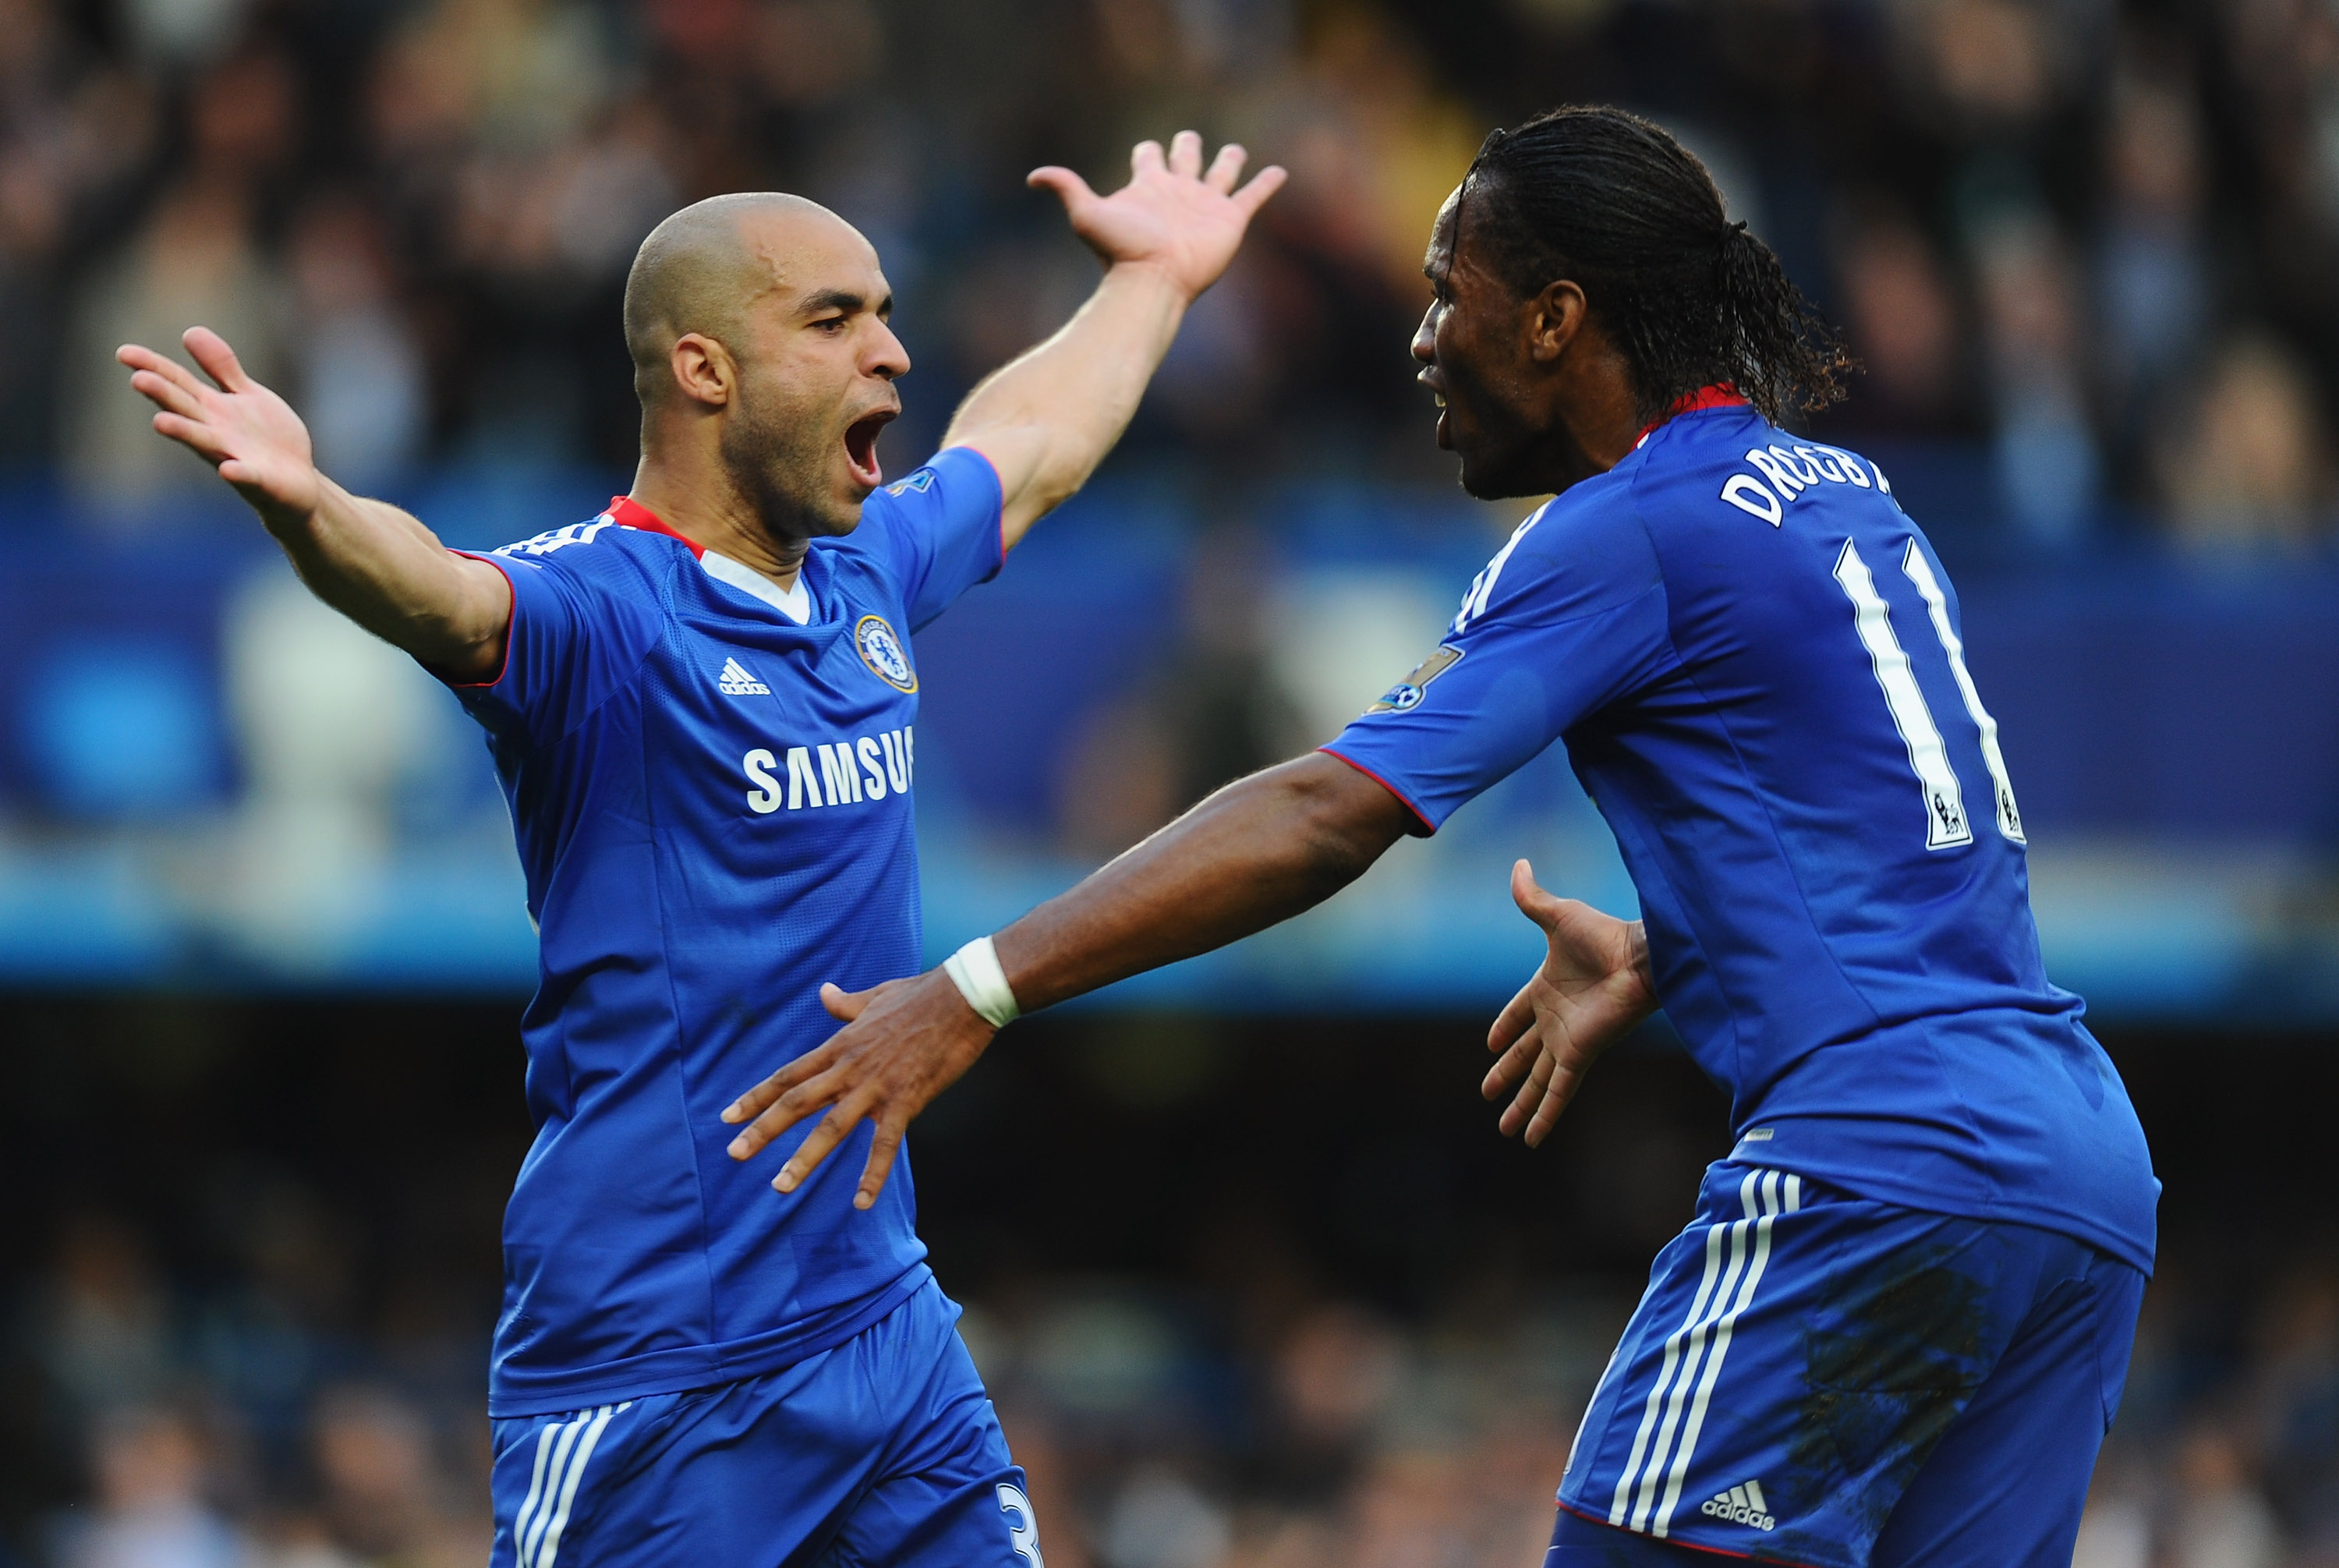 LONDON, ENGLAND - OCTOBER 03:  Alex of Chelsea celebrates with fellow goalscorer Didier Drogba after scoring during the Barclays Premier League match between Chelsea and Arsenal at Stamford Bridge on October 3, 2010 in London, England.  (Photo by Mike Hew